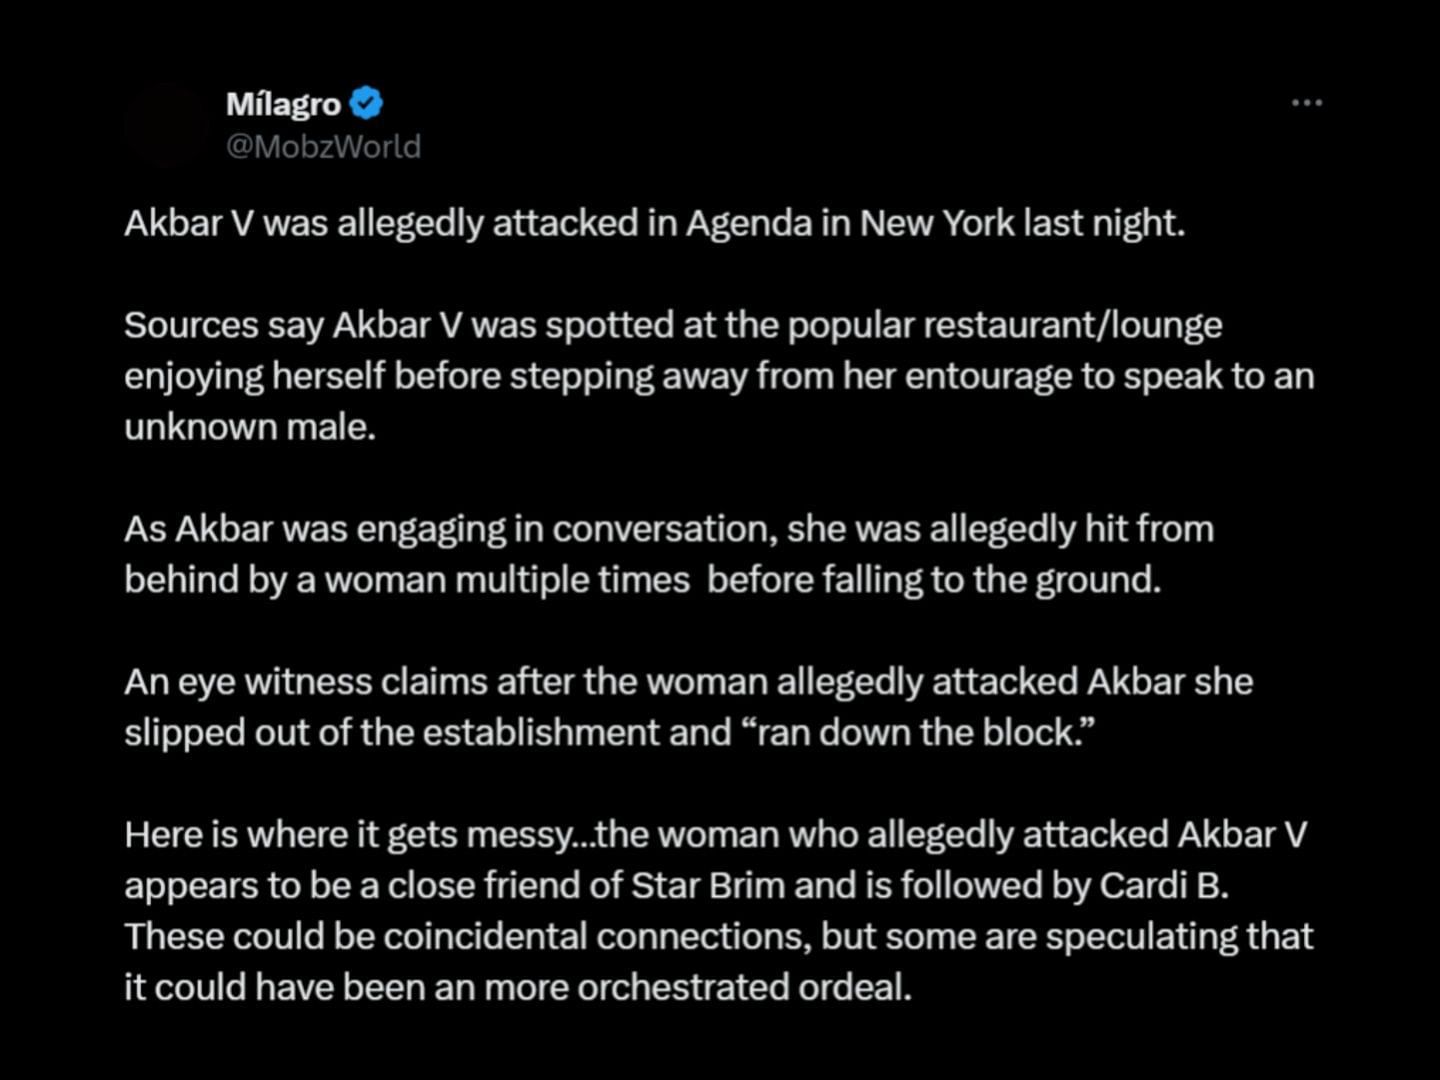 Akbar V&#039;s attacker has supposed ties with Cardi B. (Image via X/@MobzWorld)